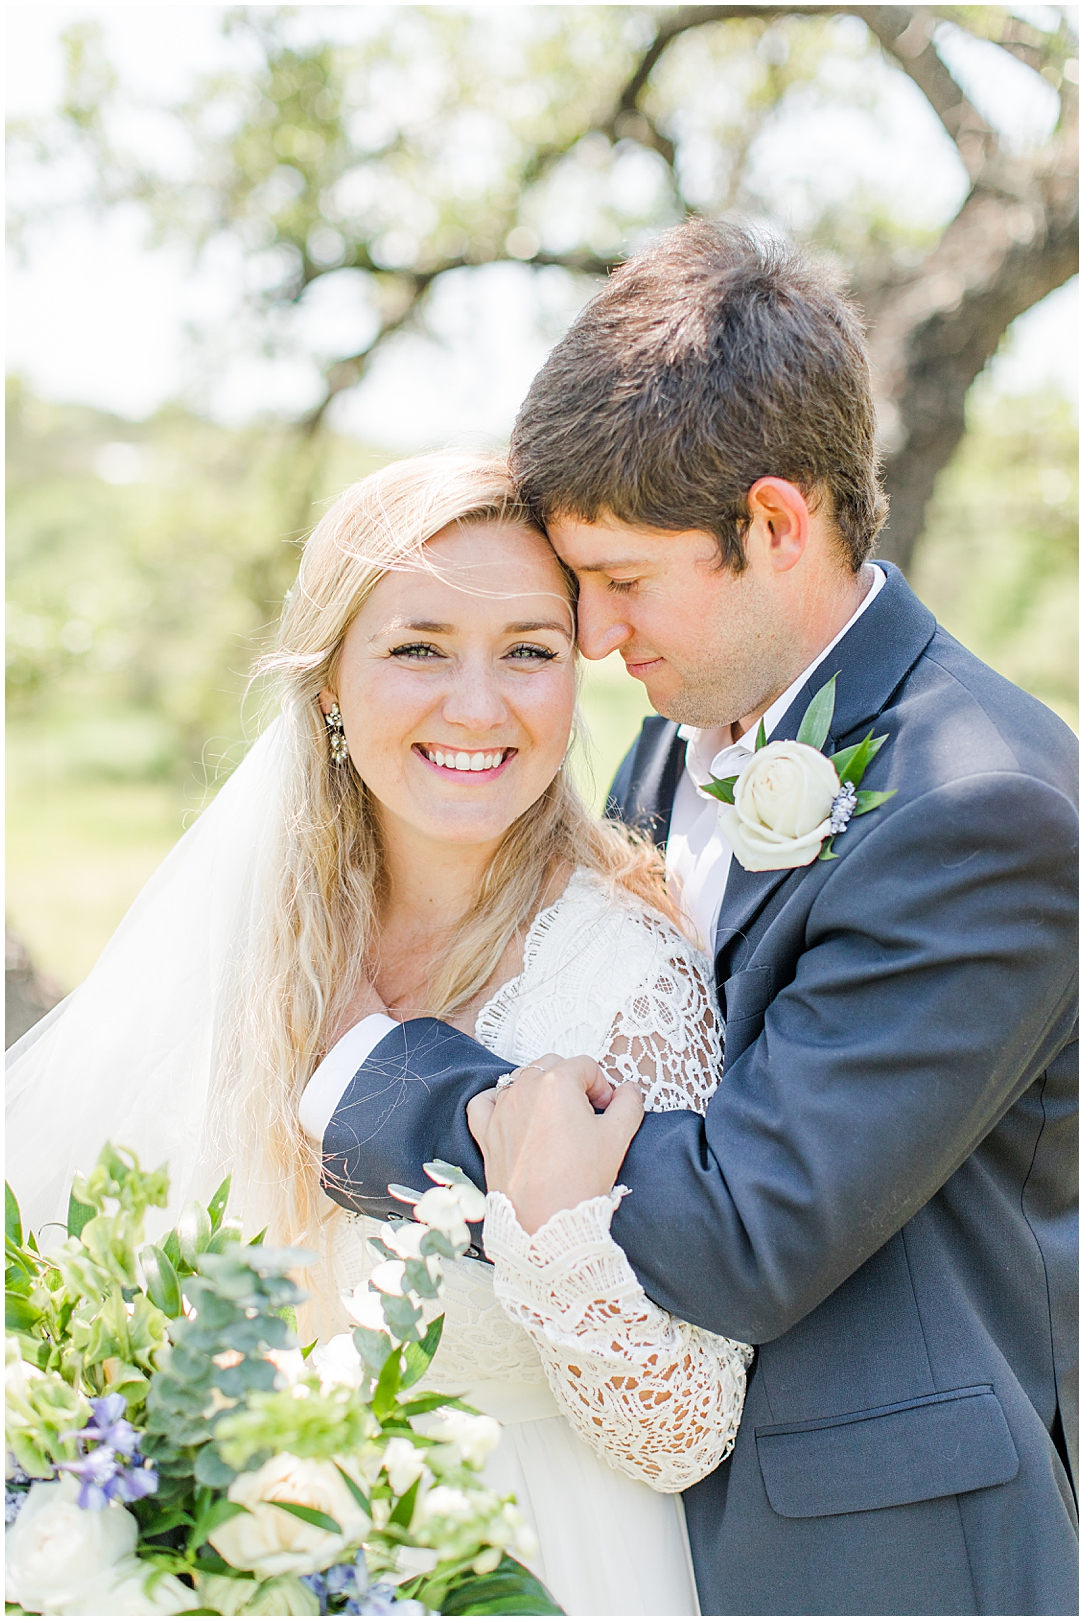 An Intimate elopement for two in Dripping Springs Texas by Allison Jeffers Photography 0064